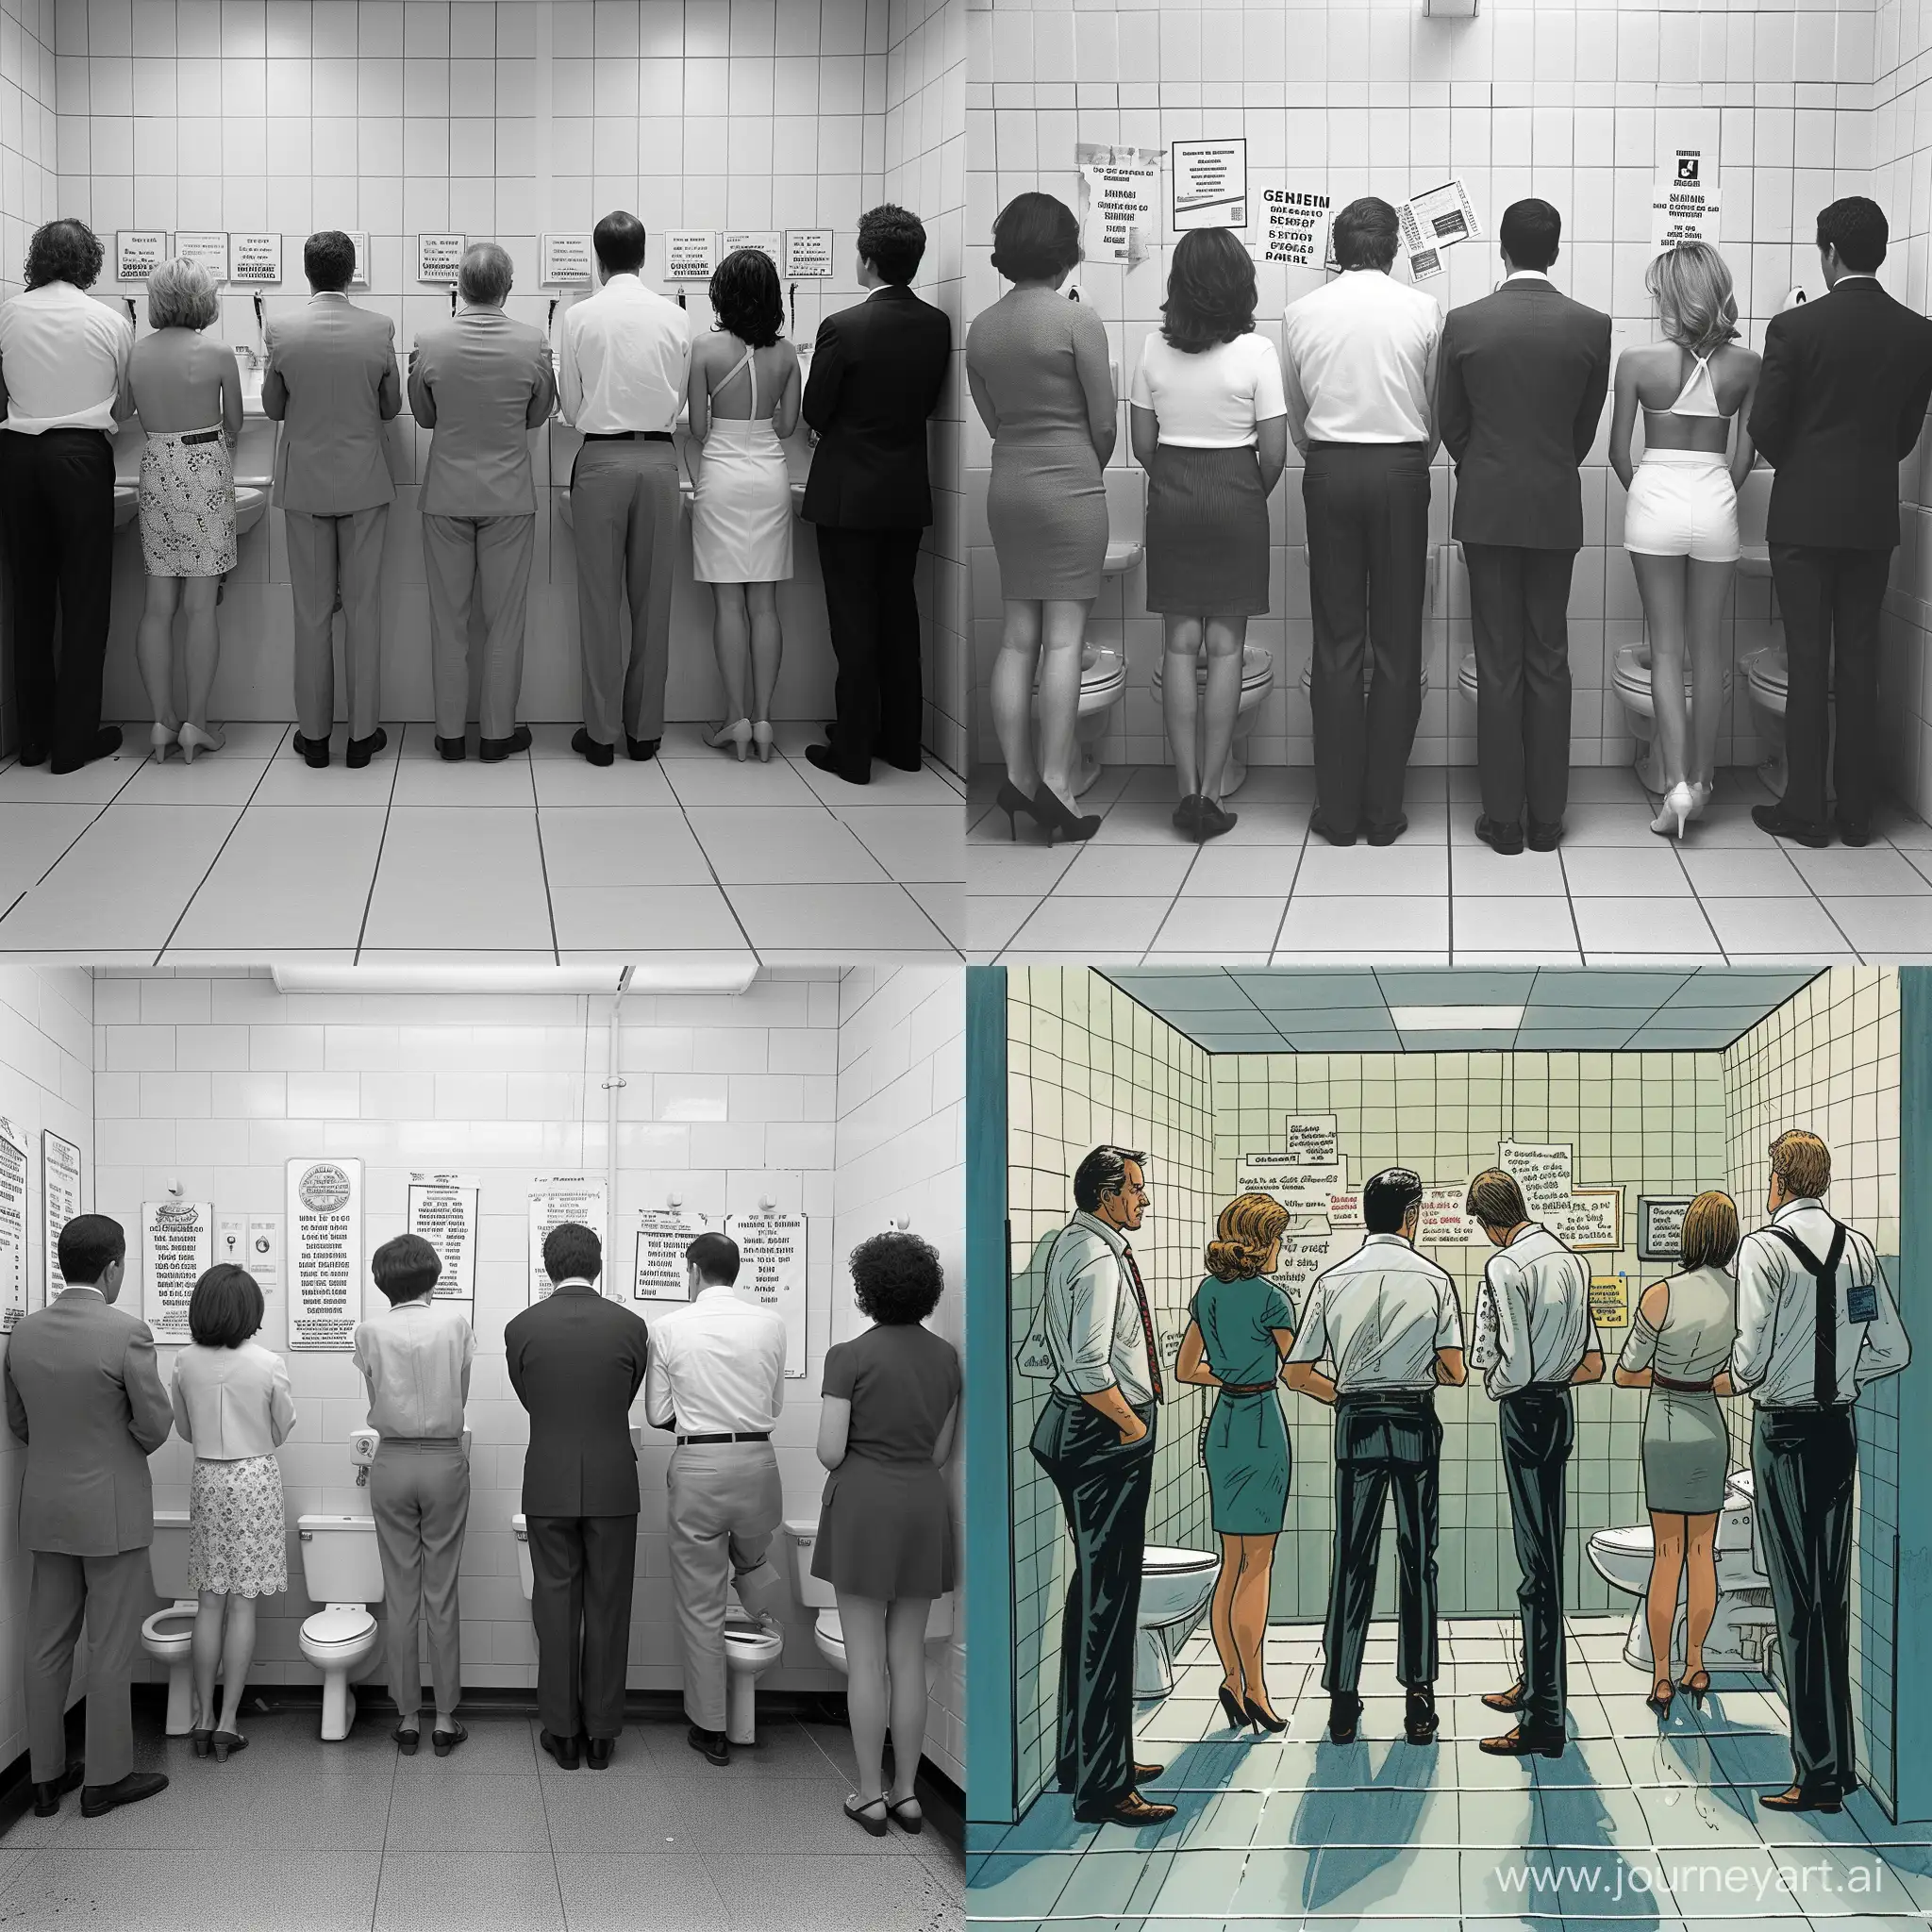 Ten bank employees in the toilet line (five men and five women).  There should be humorous sentences and signs on the wall of the bathroom